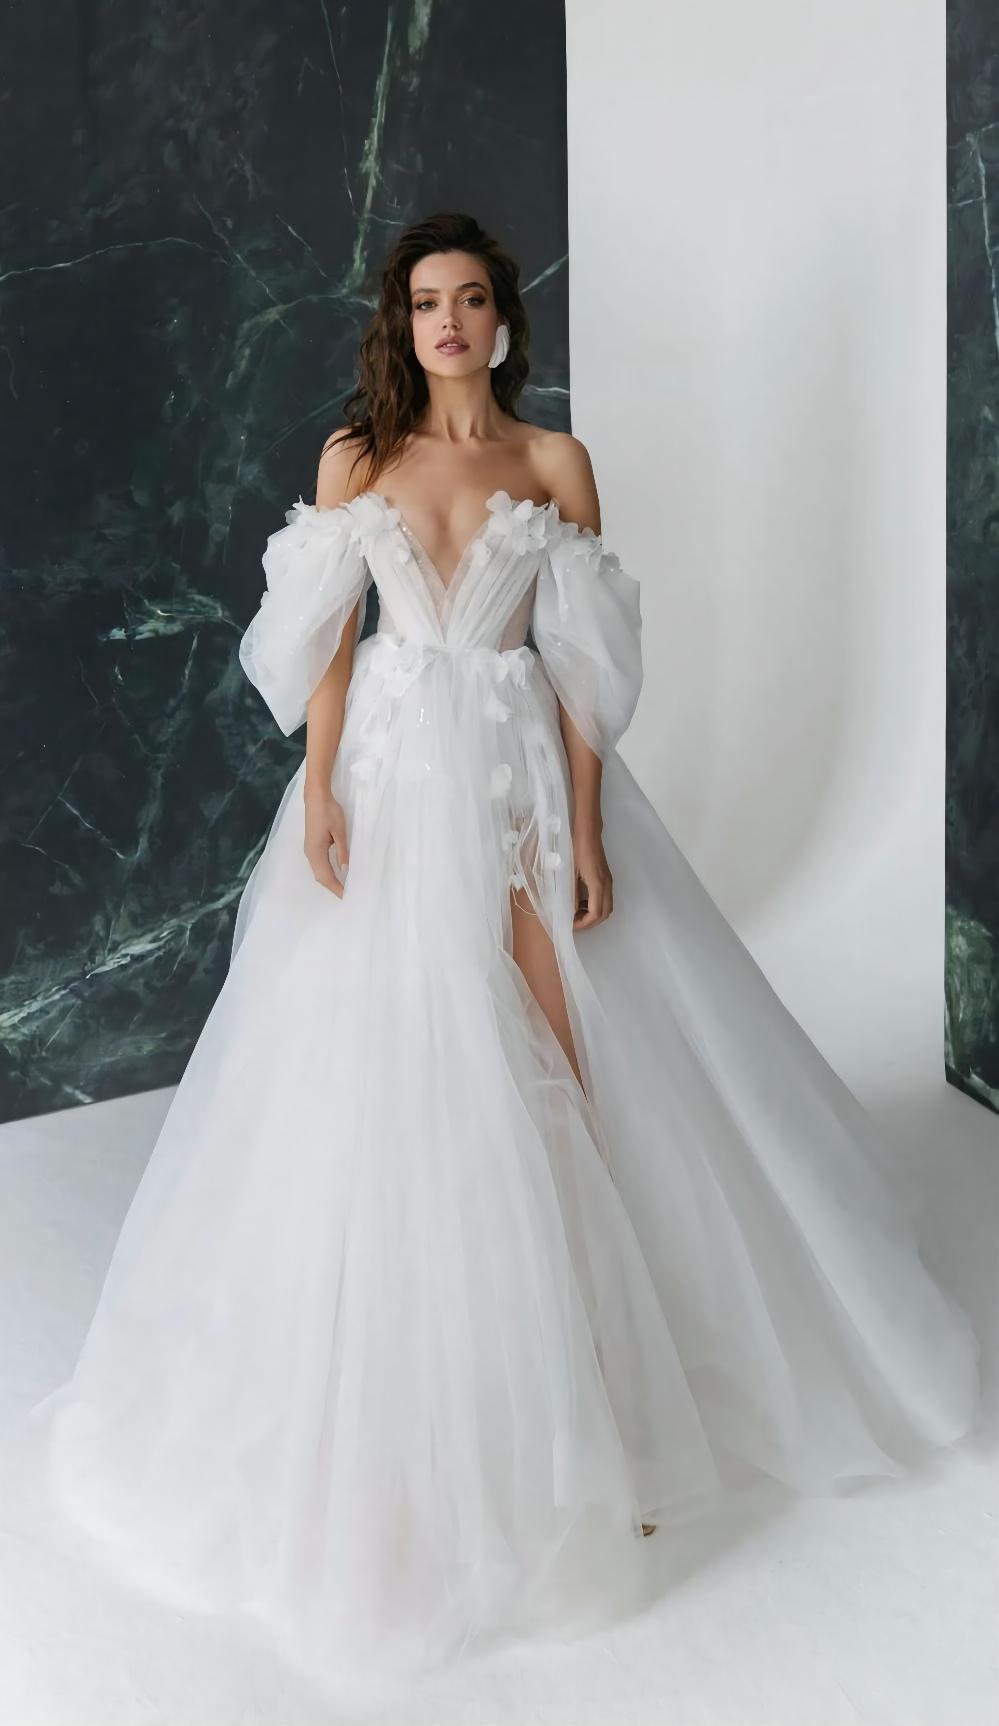 Off-the-shoulder Pearl Beaded Ball Gown Wedding Dress | Kleinfeld Bridal